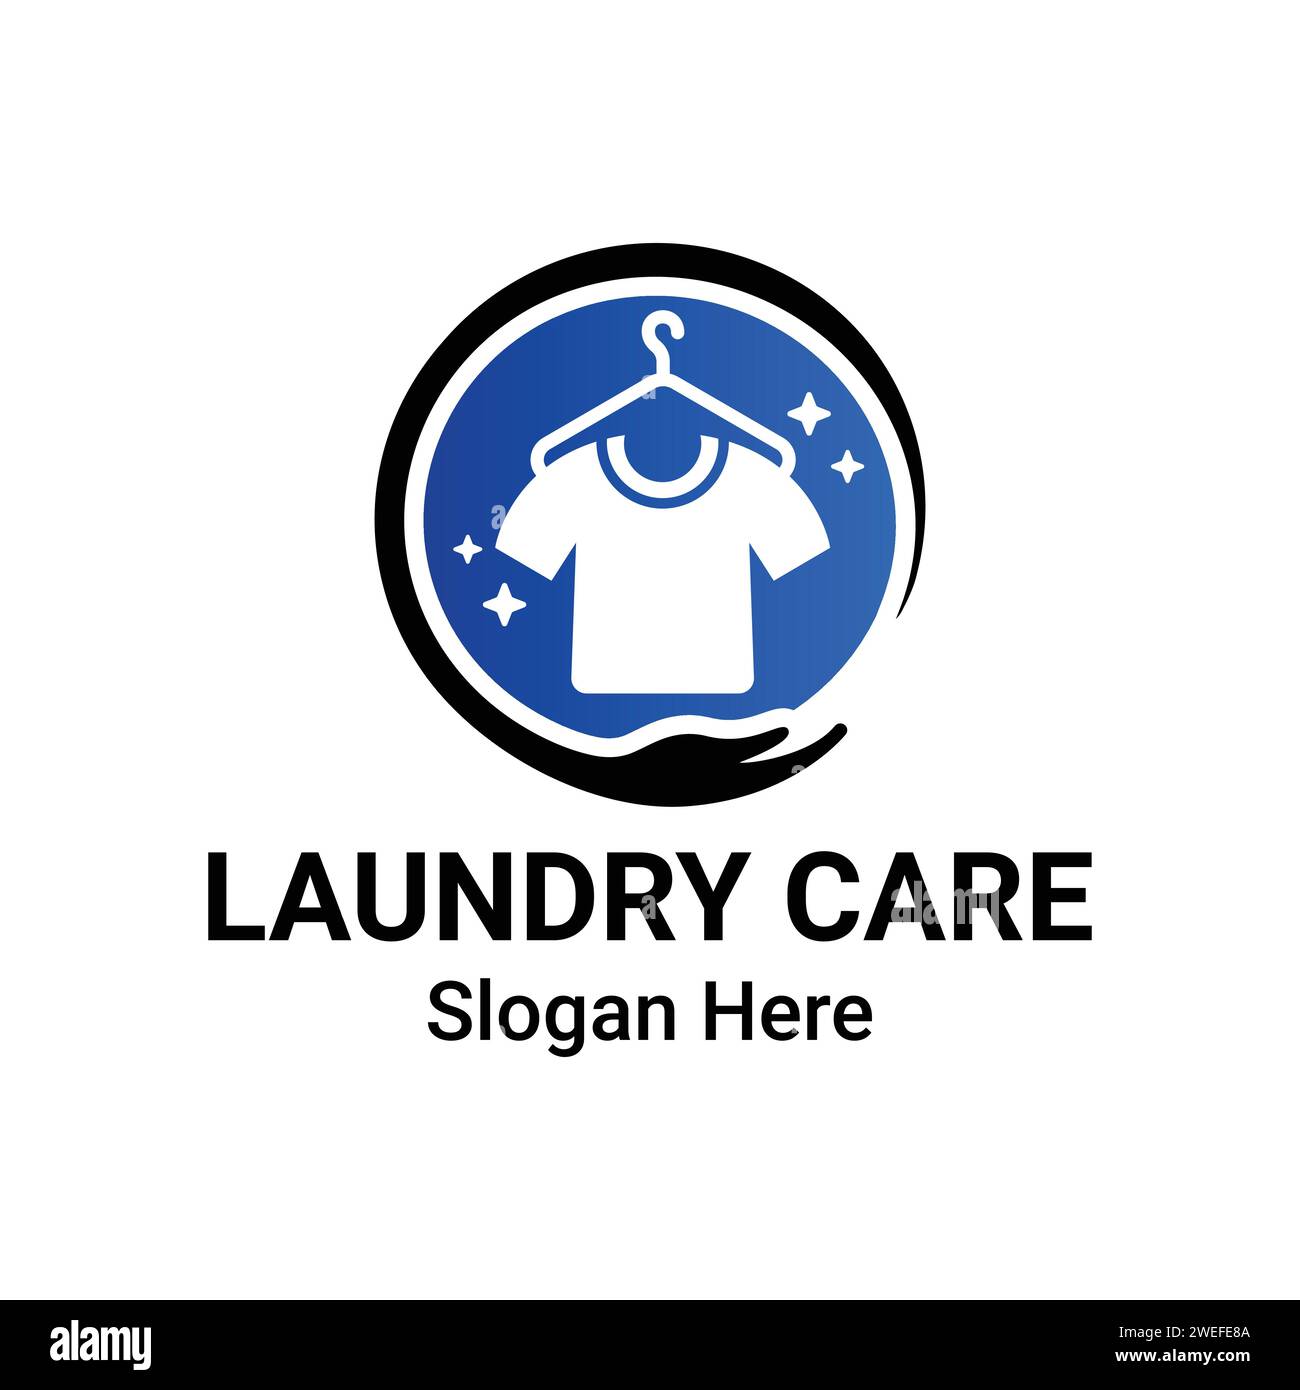 Laundry Care Logo Design. Dry cleaning logo template. Simple laundry illustration logo with t-shirt and hanger symbol. Laundry vector logo on white an Stock Vector